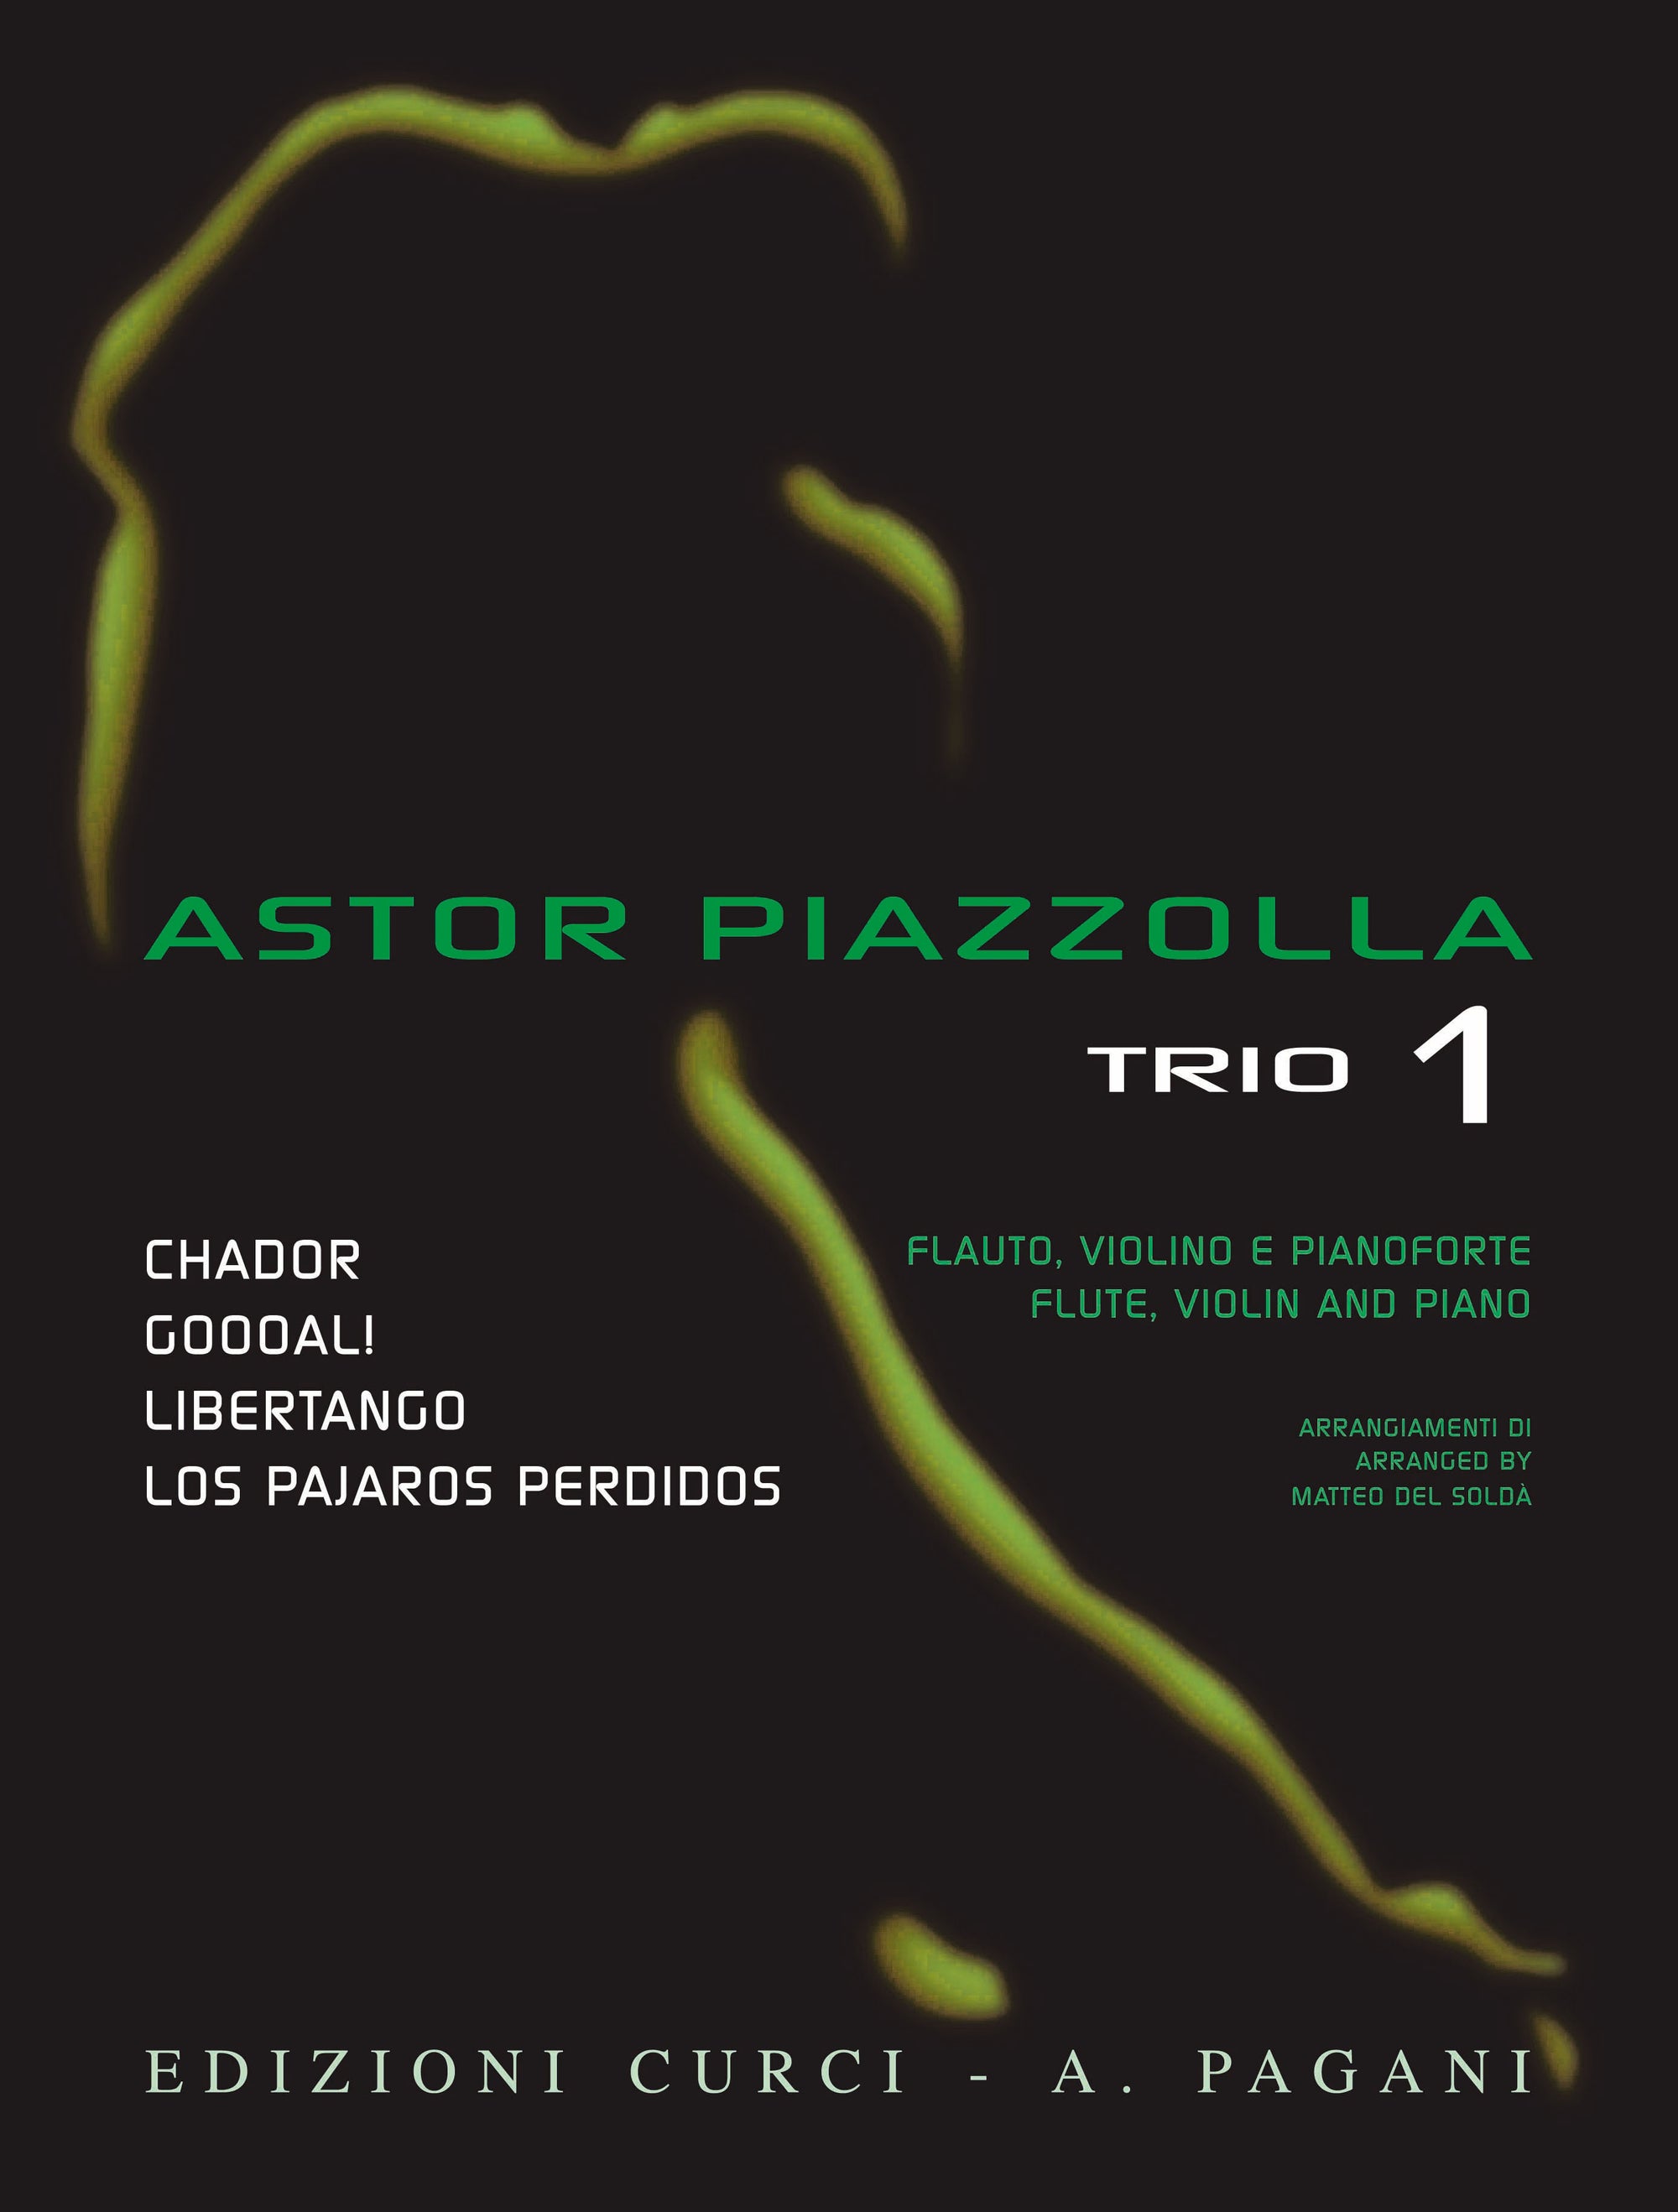 Piazzolla for Trio - Volume 1